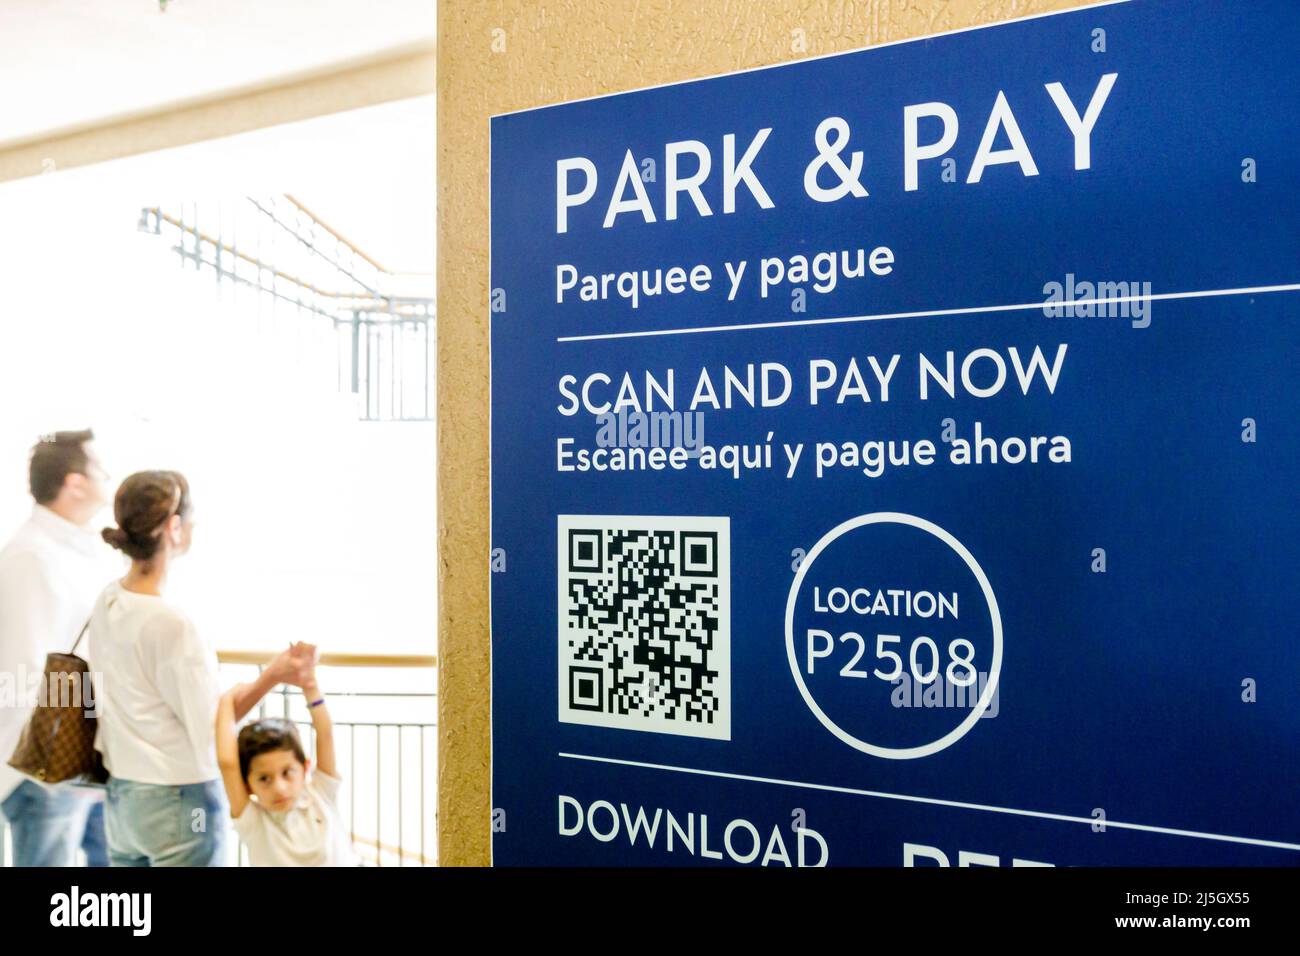 Miami Florida Coral Gables Shops at Merrick Park upscale outdoor shopping mall car park parking garage sign scan pay now QR code Hispanic family Spani Stock Photo